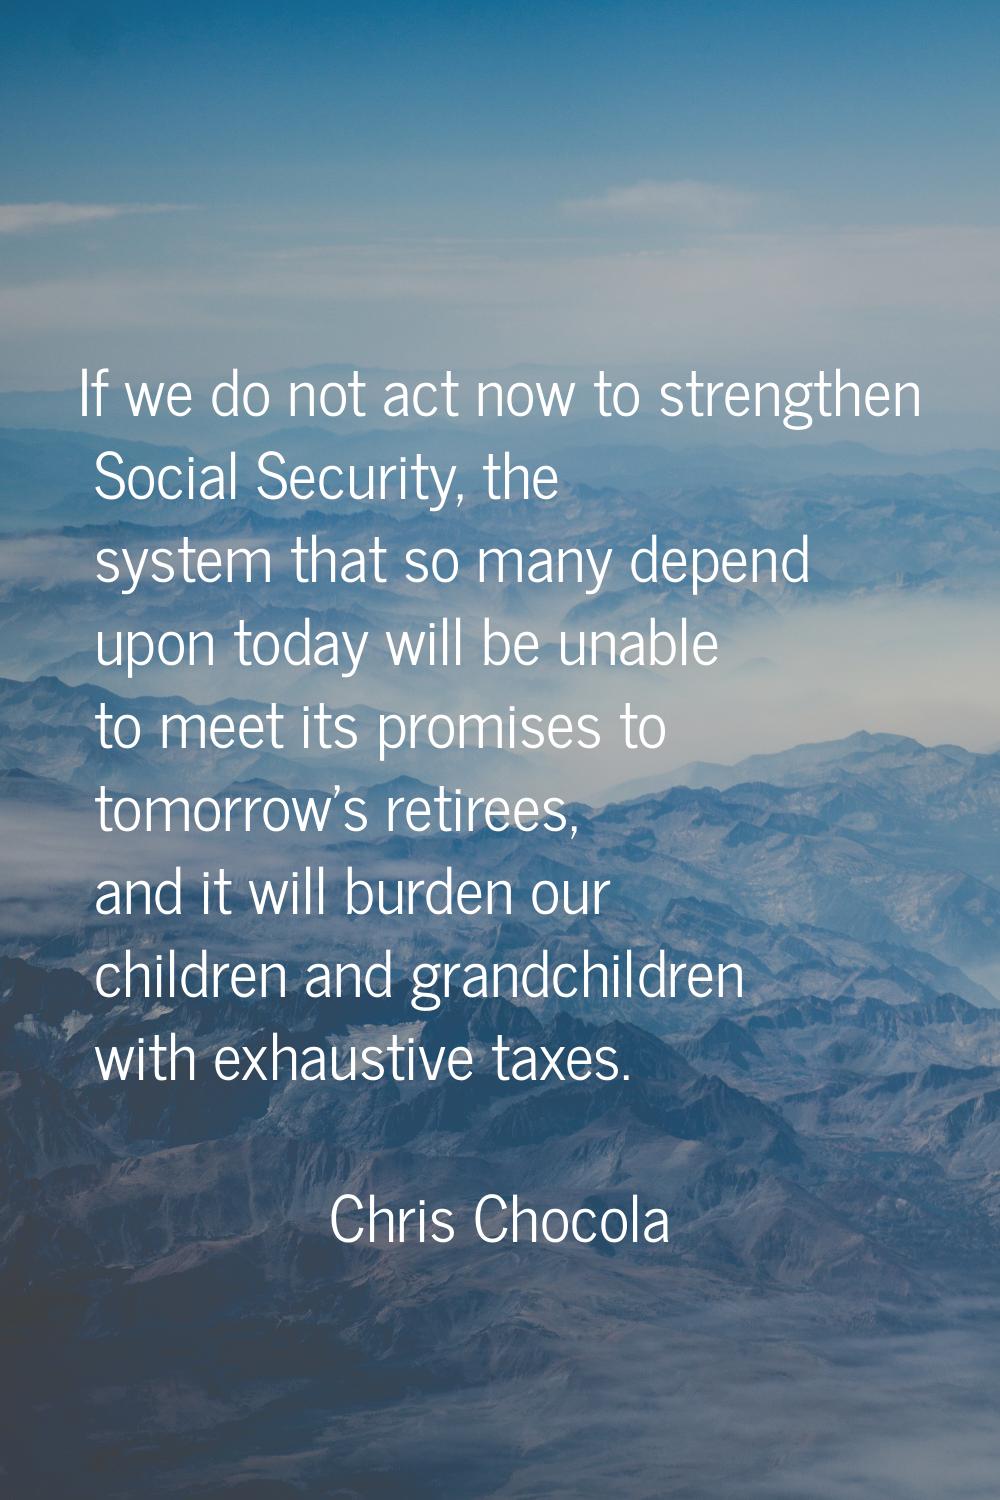 If we do not act now to strengthen Social Security, the system that so many depend upon today will 